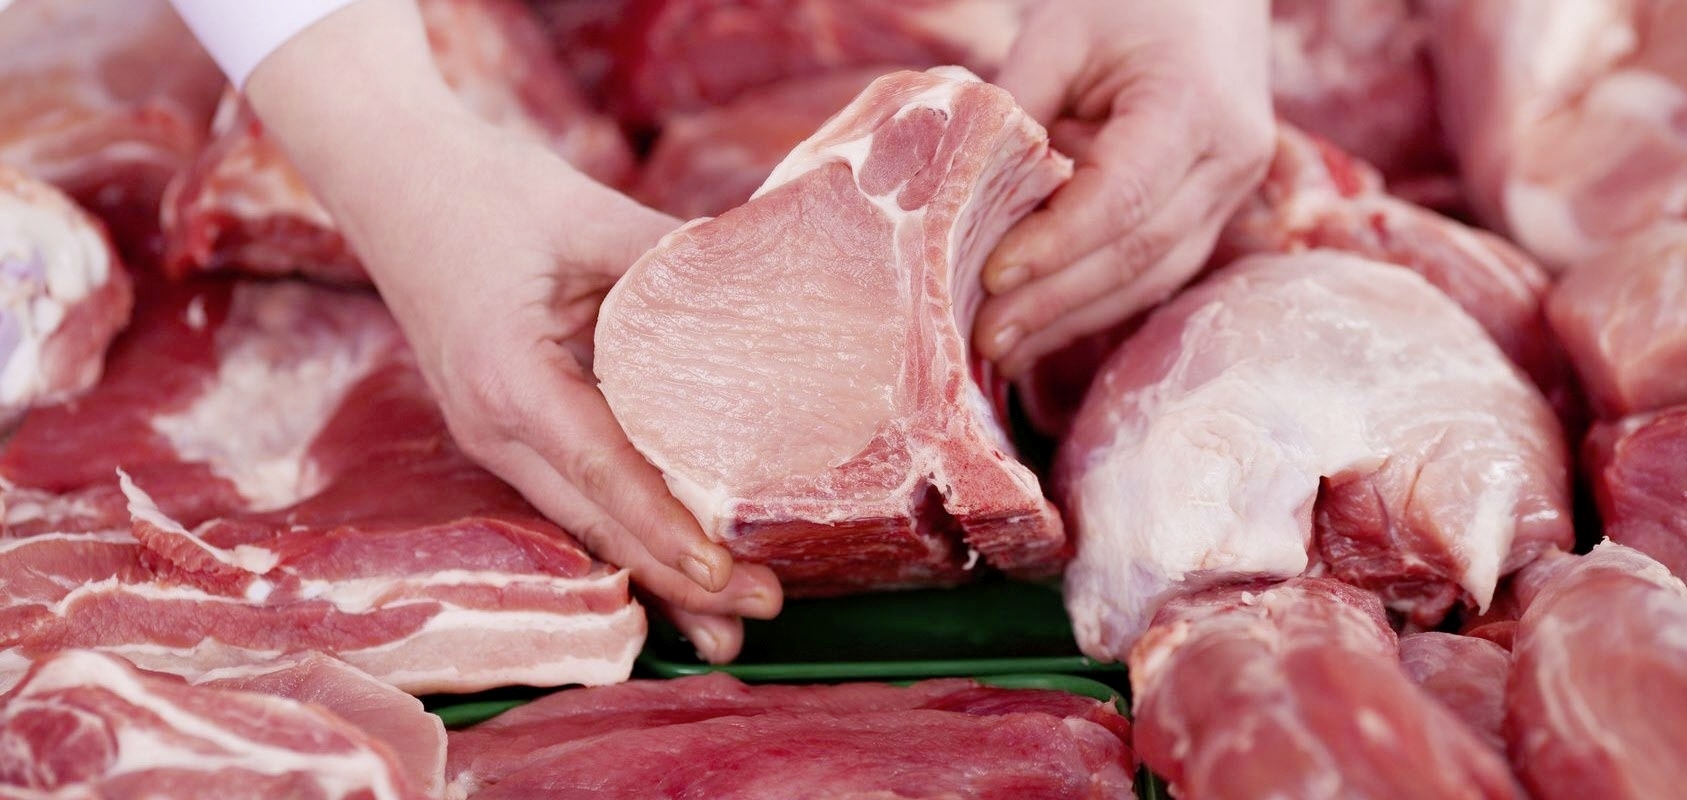 European Union: sharp decline in meat trade with Great Britain